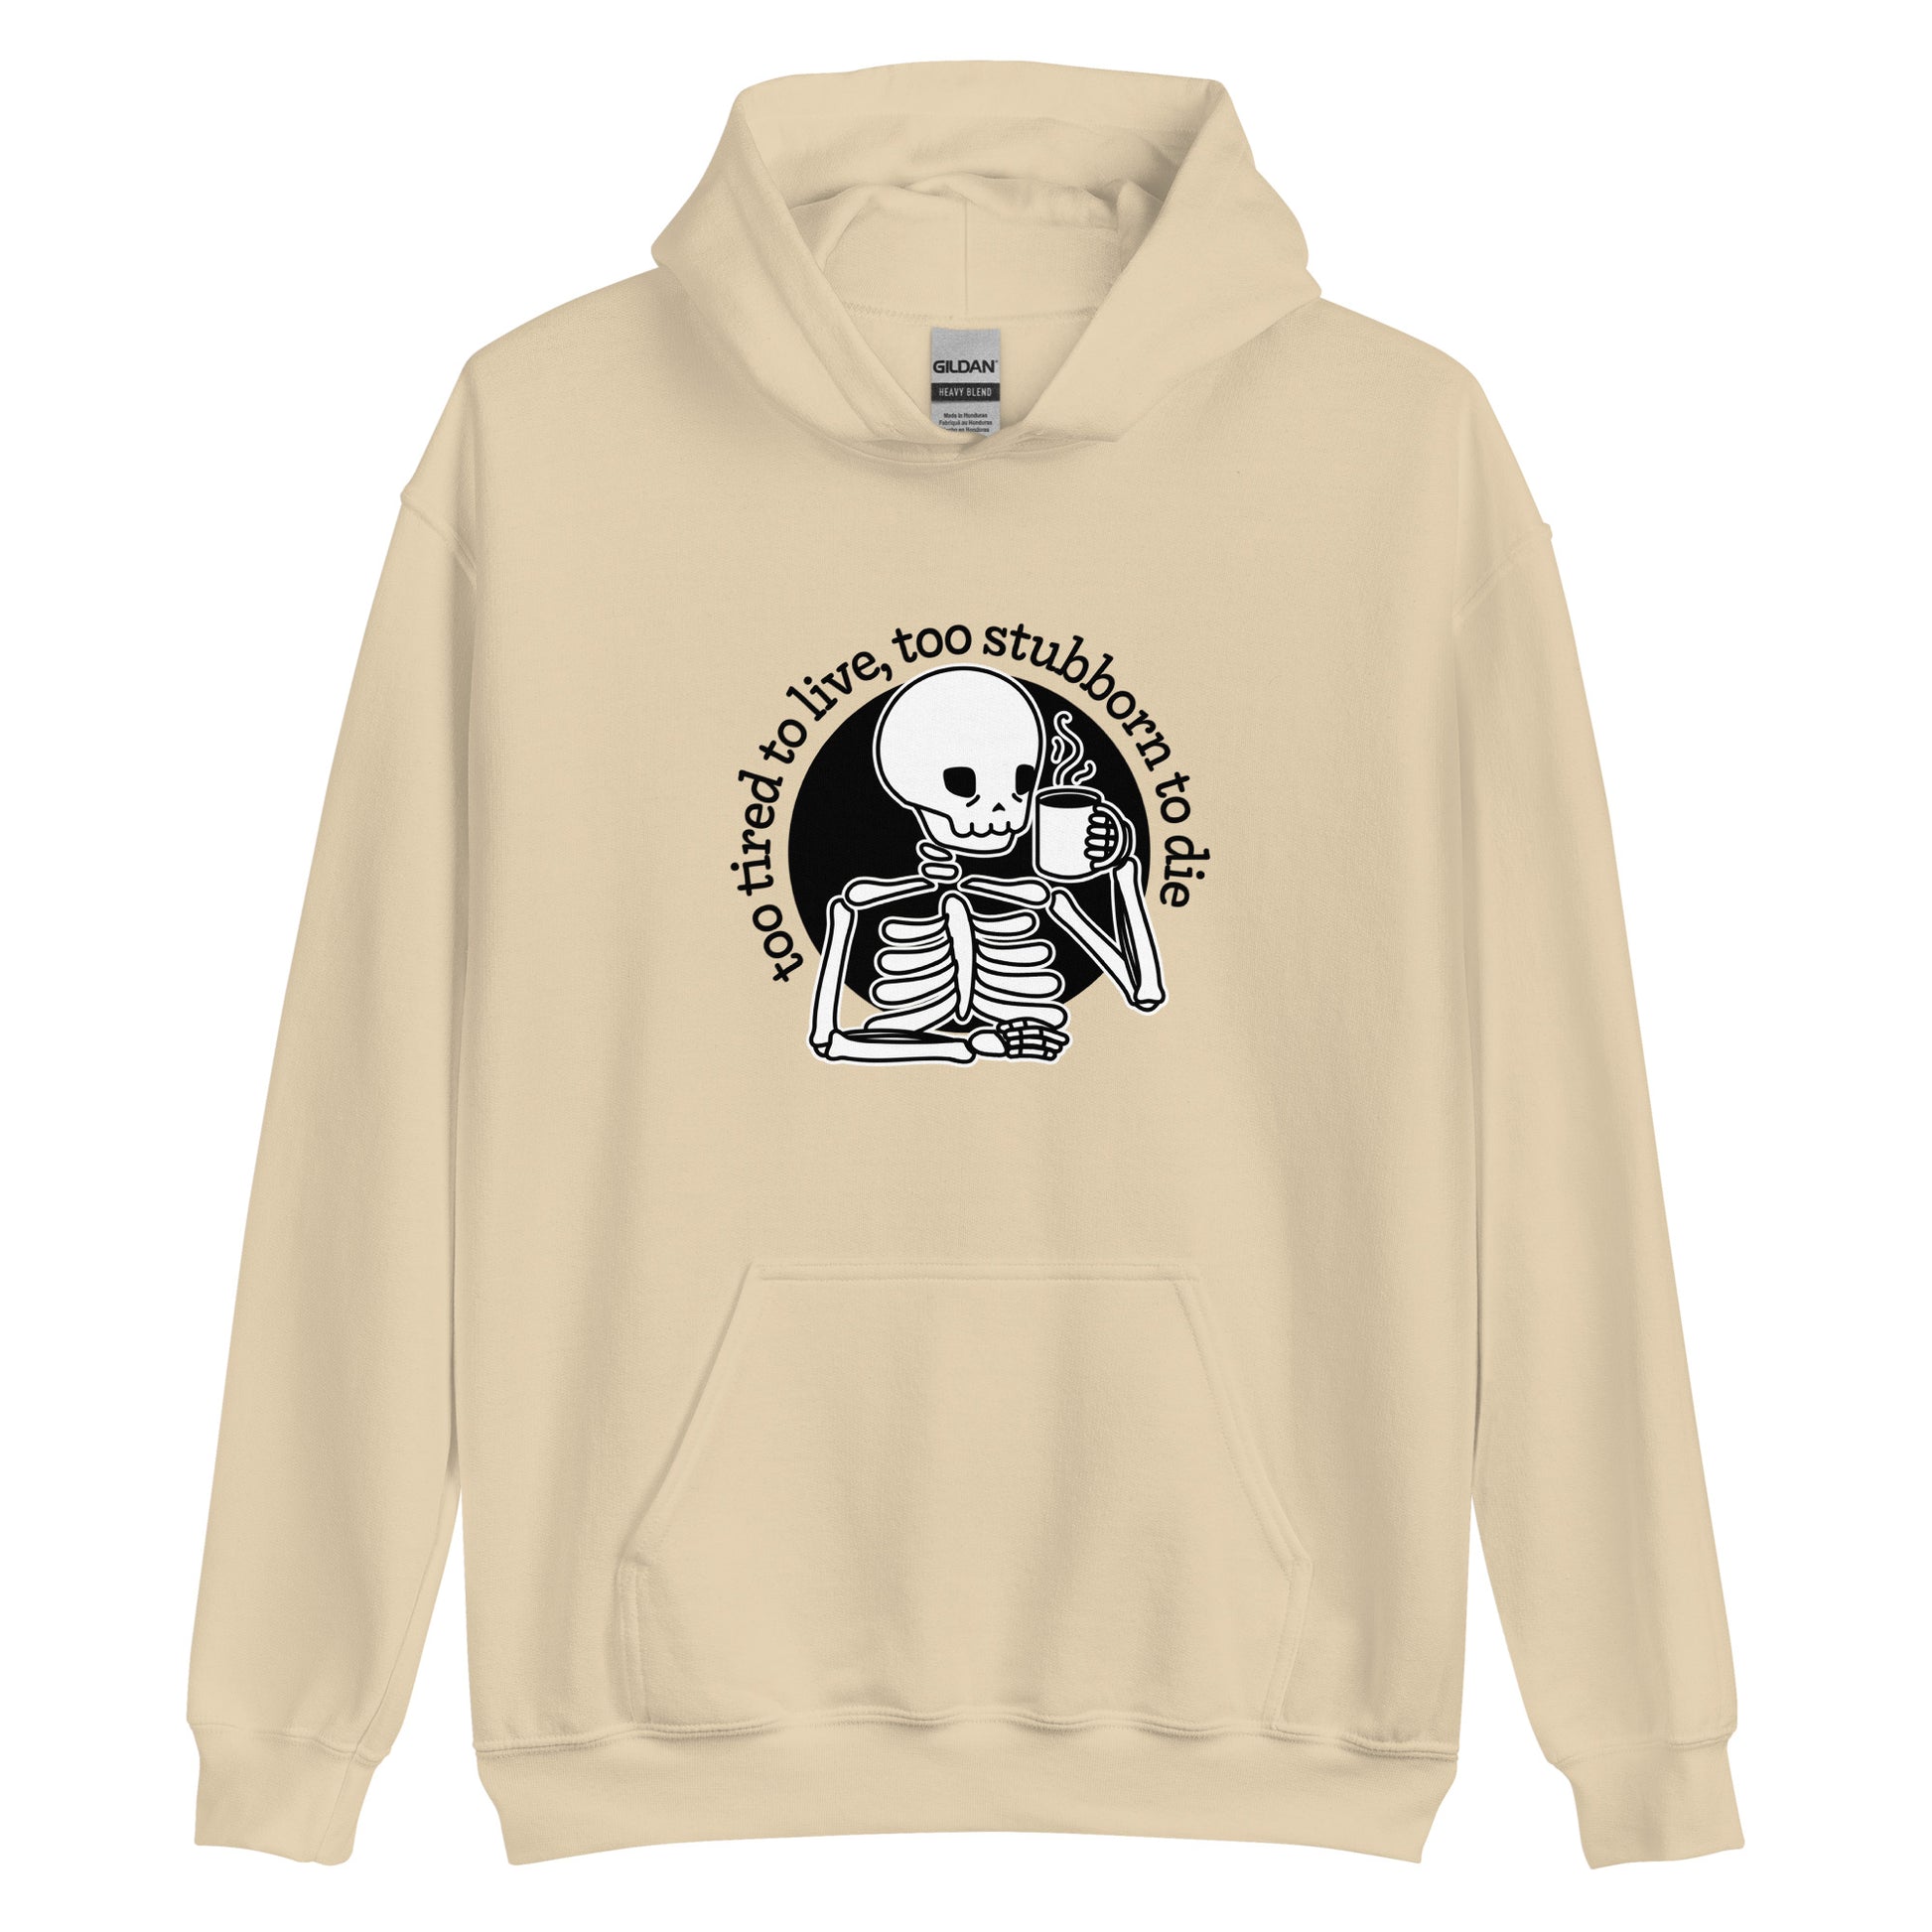 A cream-colored hooded sweatshirt featuring an illustration of a tired-looking skeleton holding a steaming mug. Text in an arc above the skeleton reads "too tired to live, too stubborn to die"